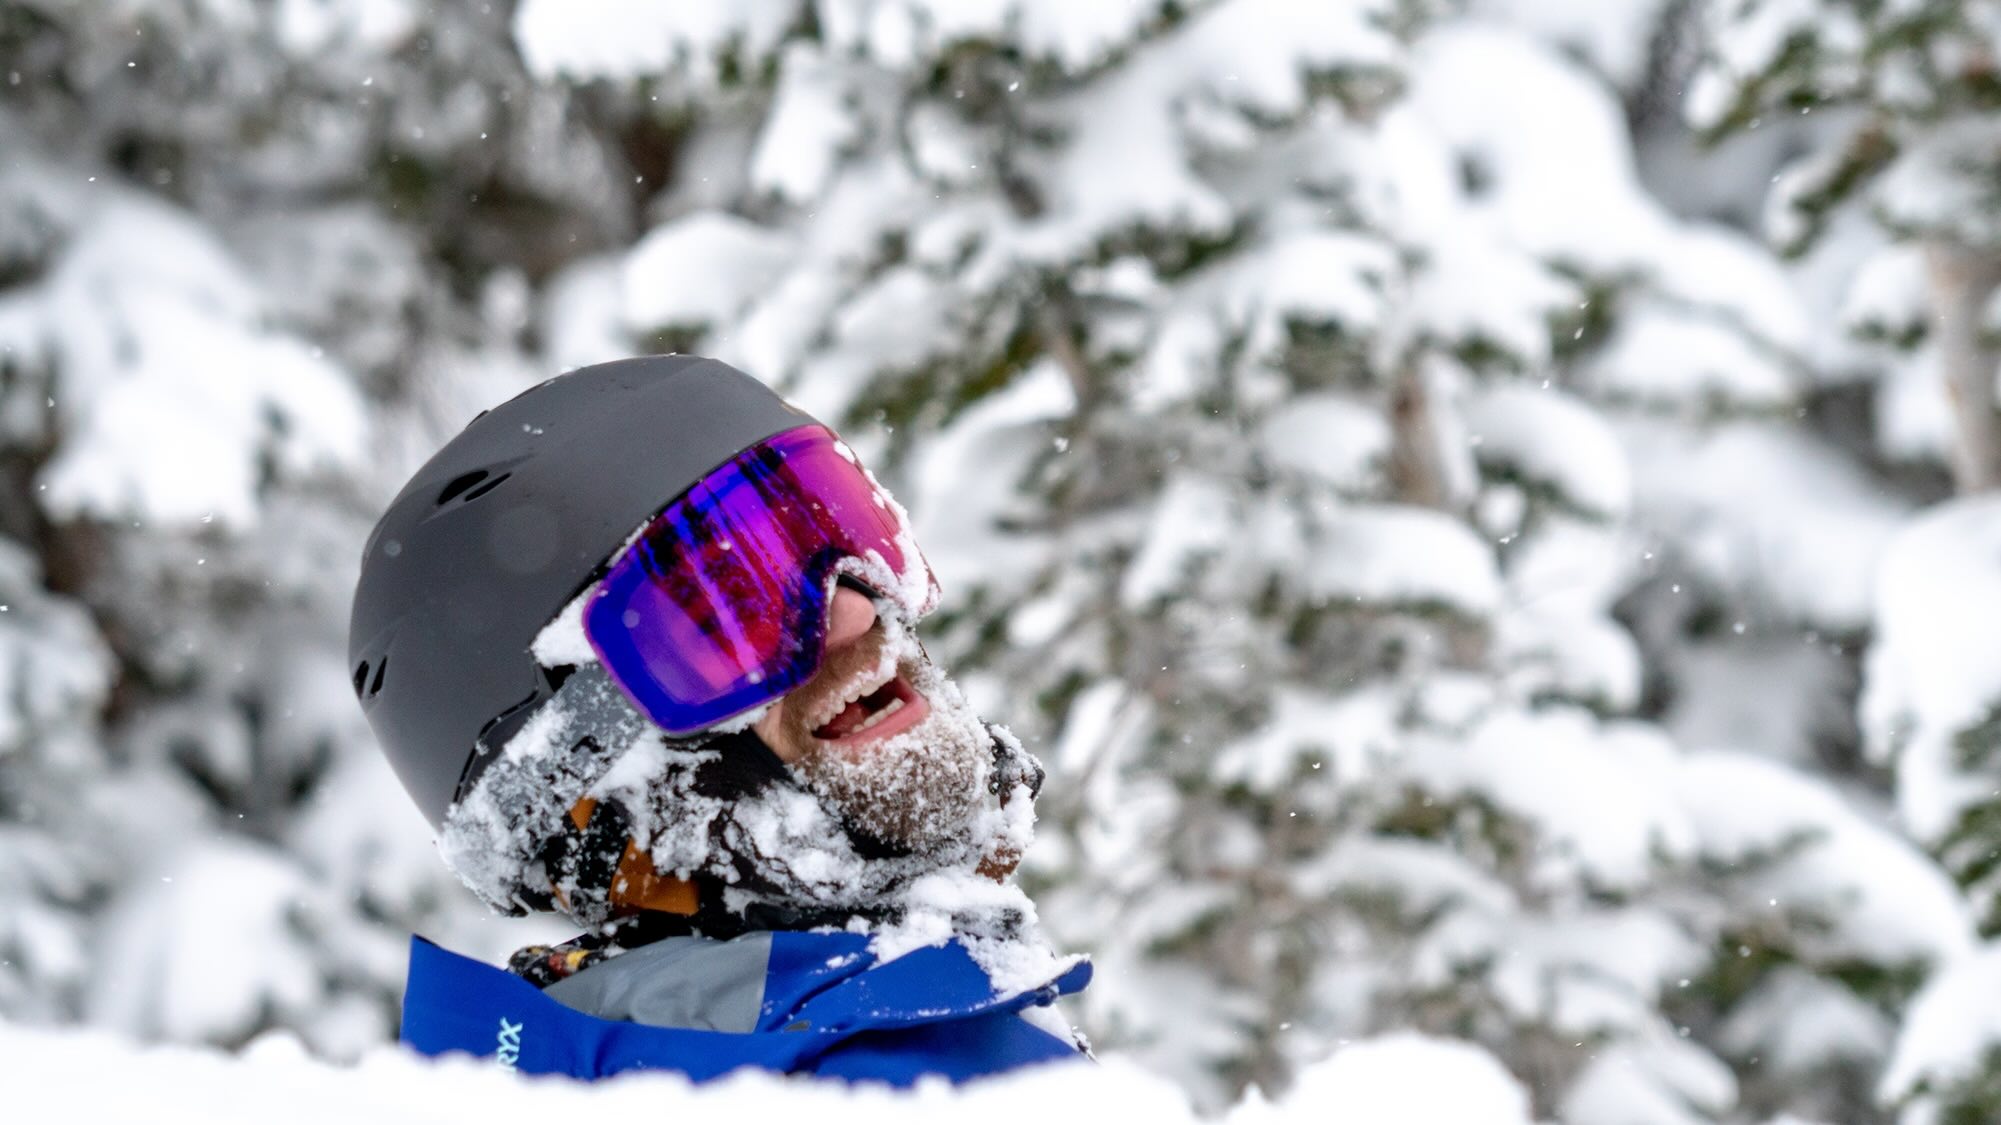 Ski Helmet Review: Find the Perfect Gear for Your Winter Adventures